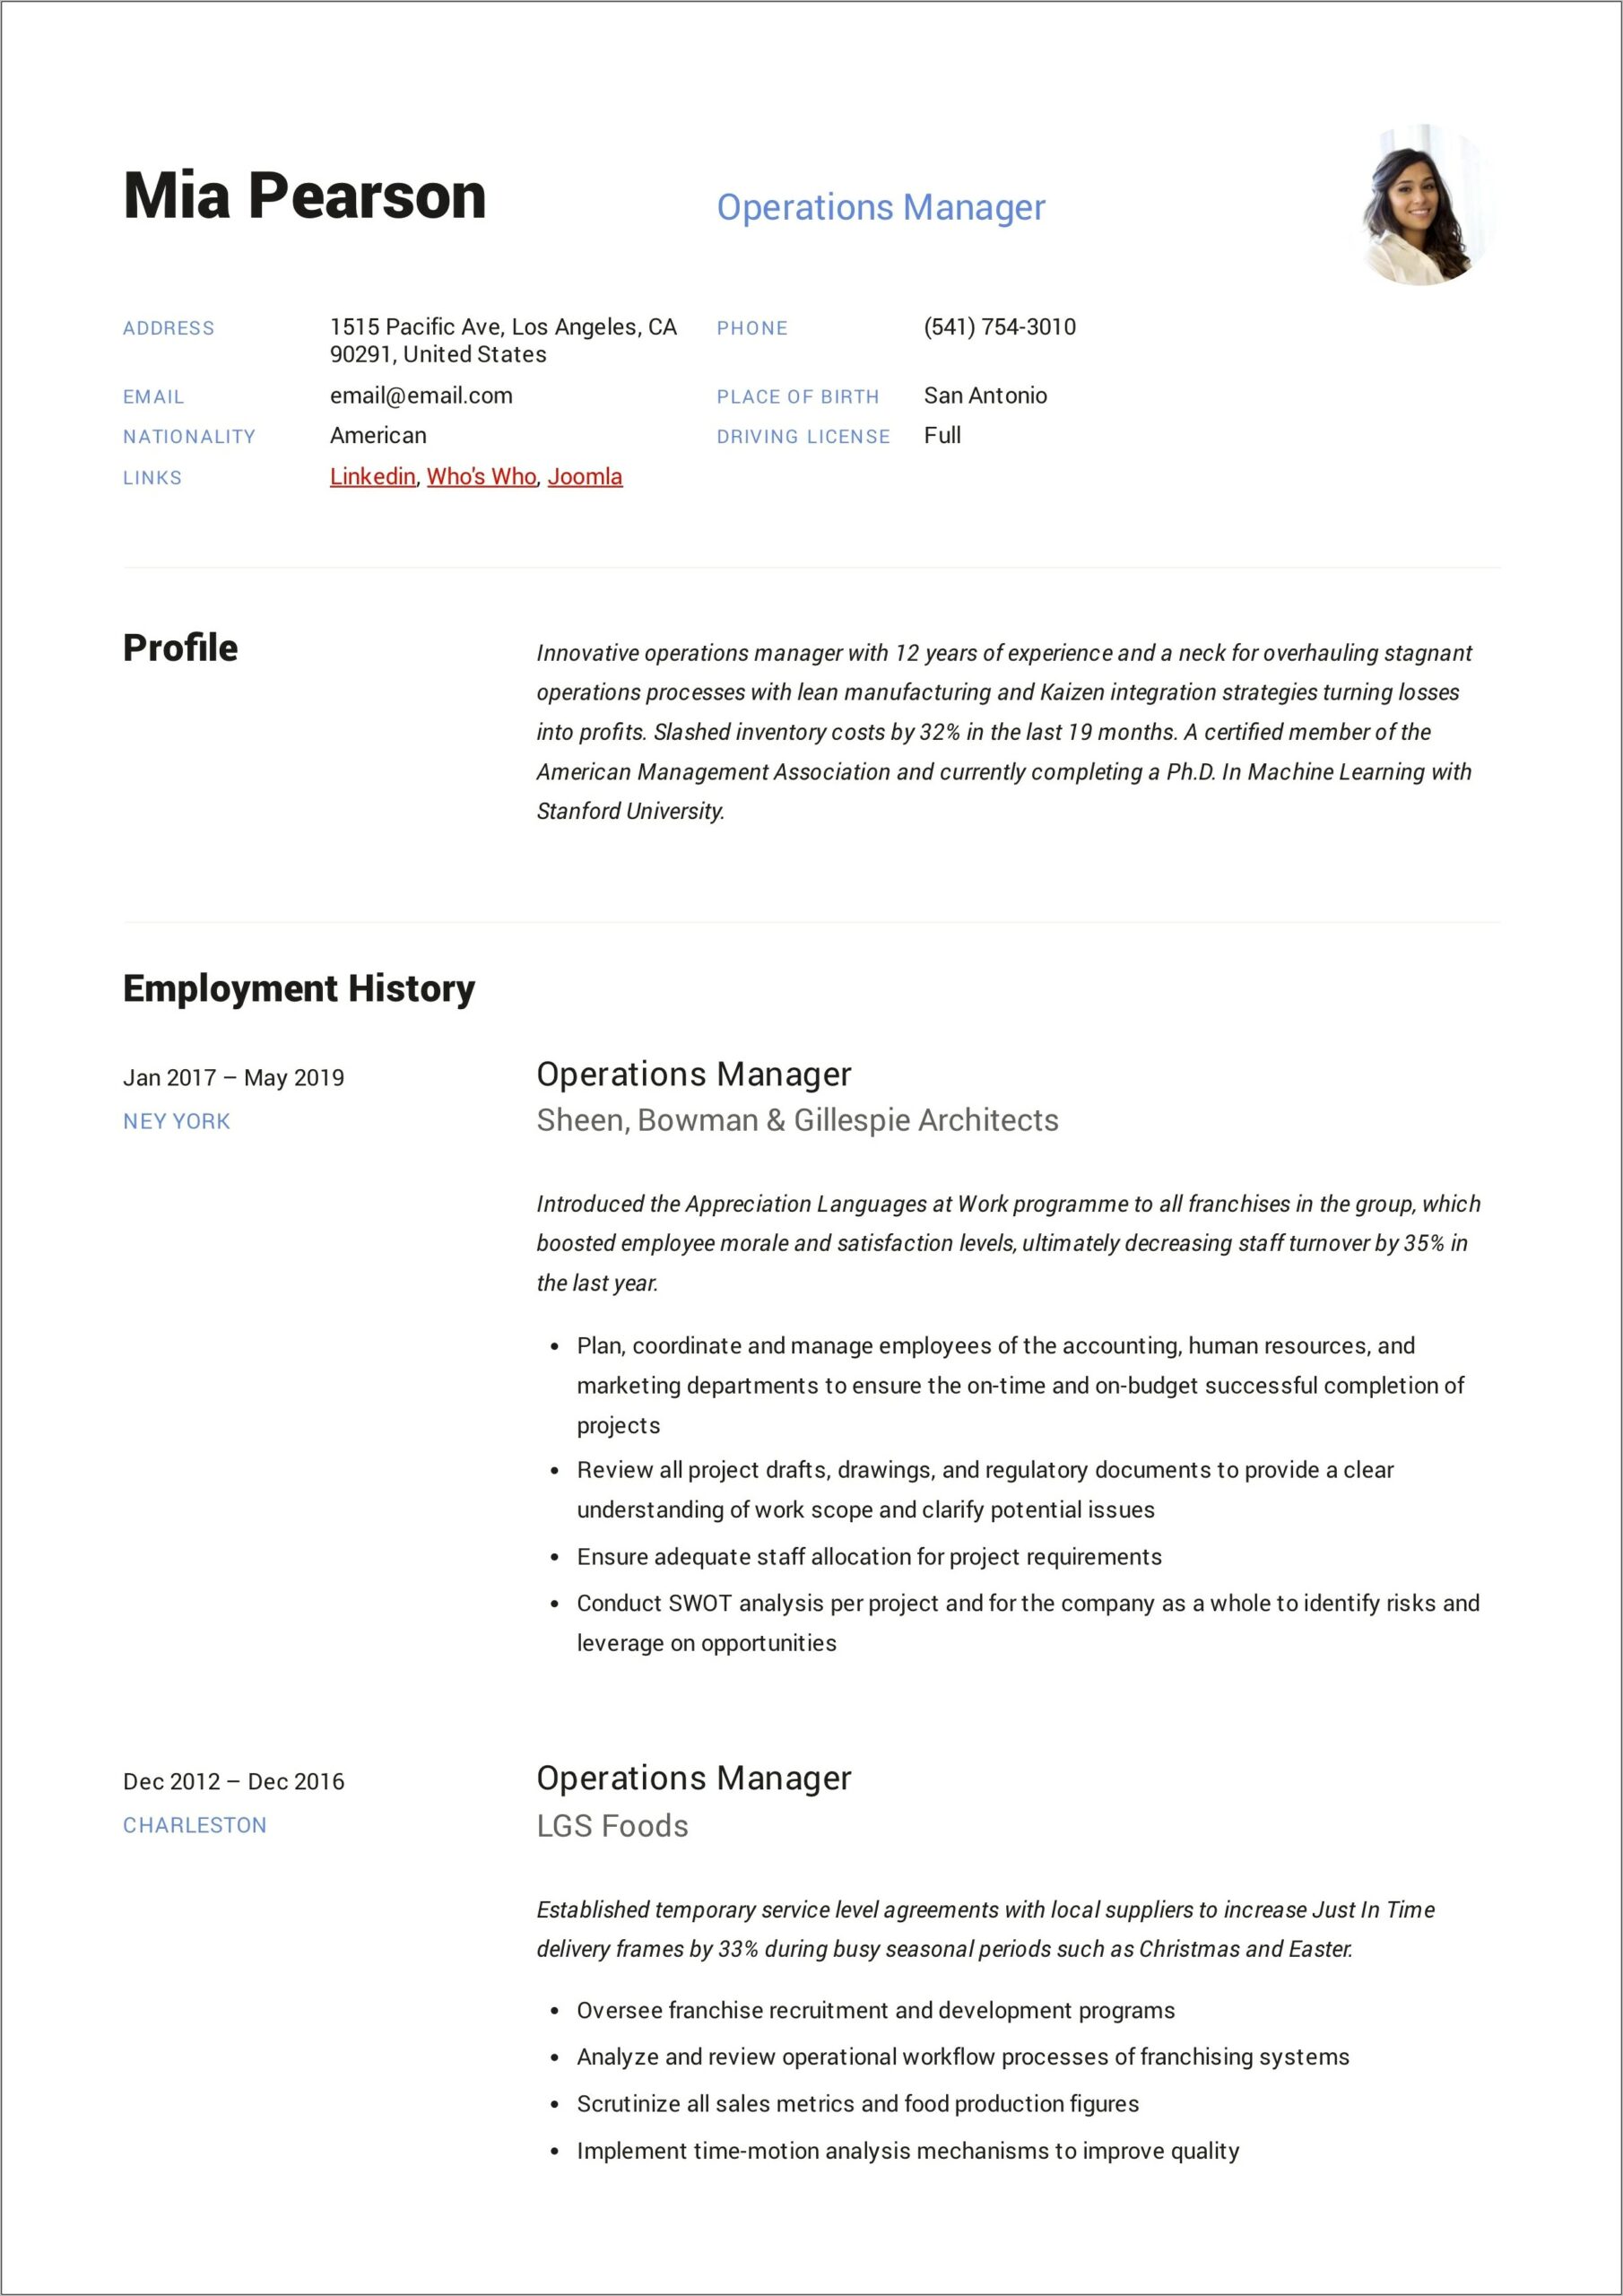 Resume Format For 5 Years Experience In Operations